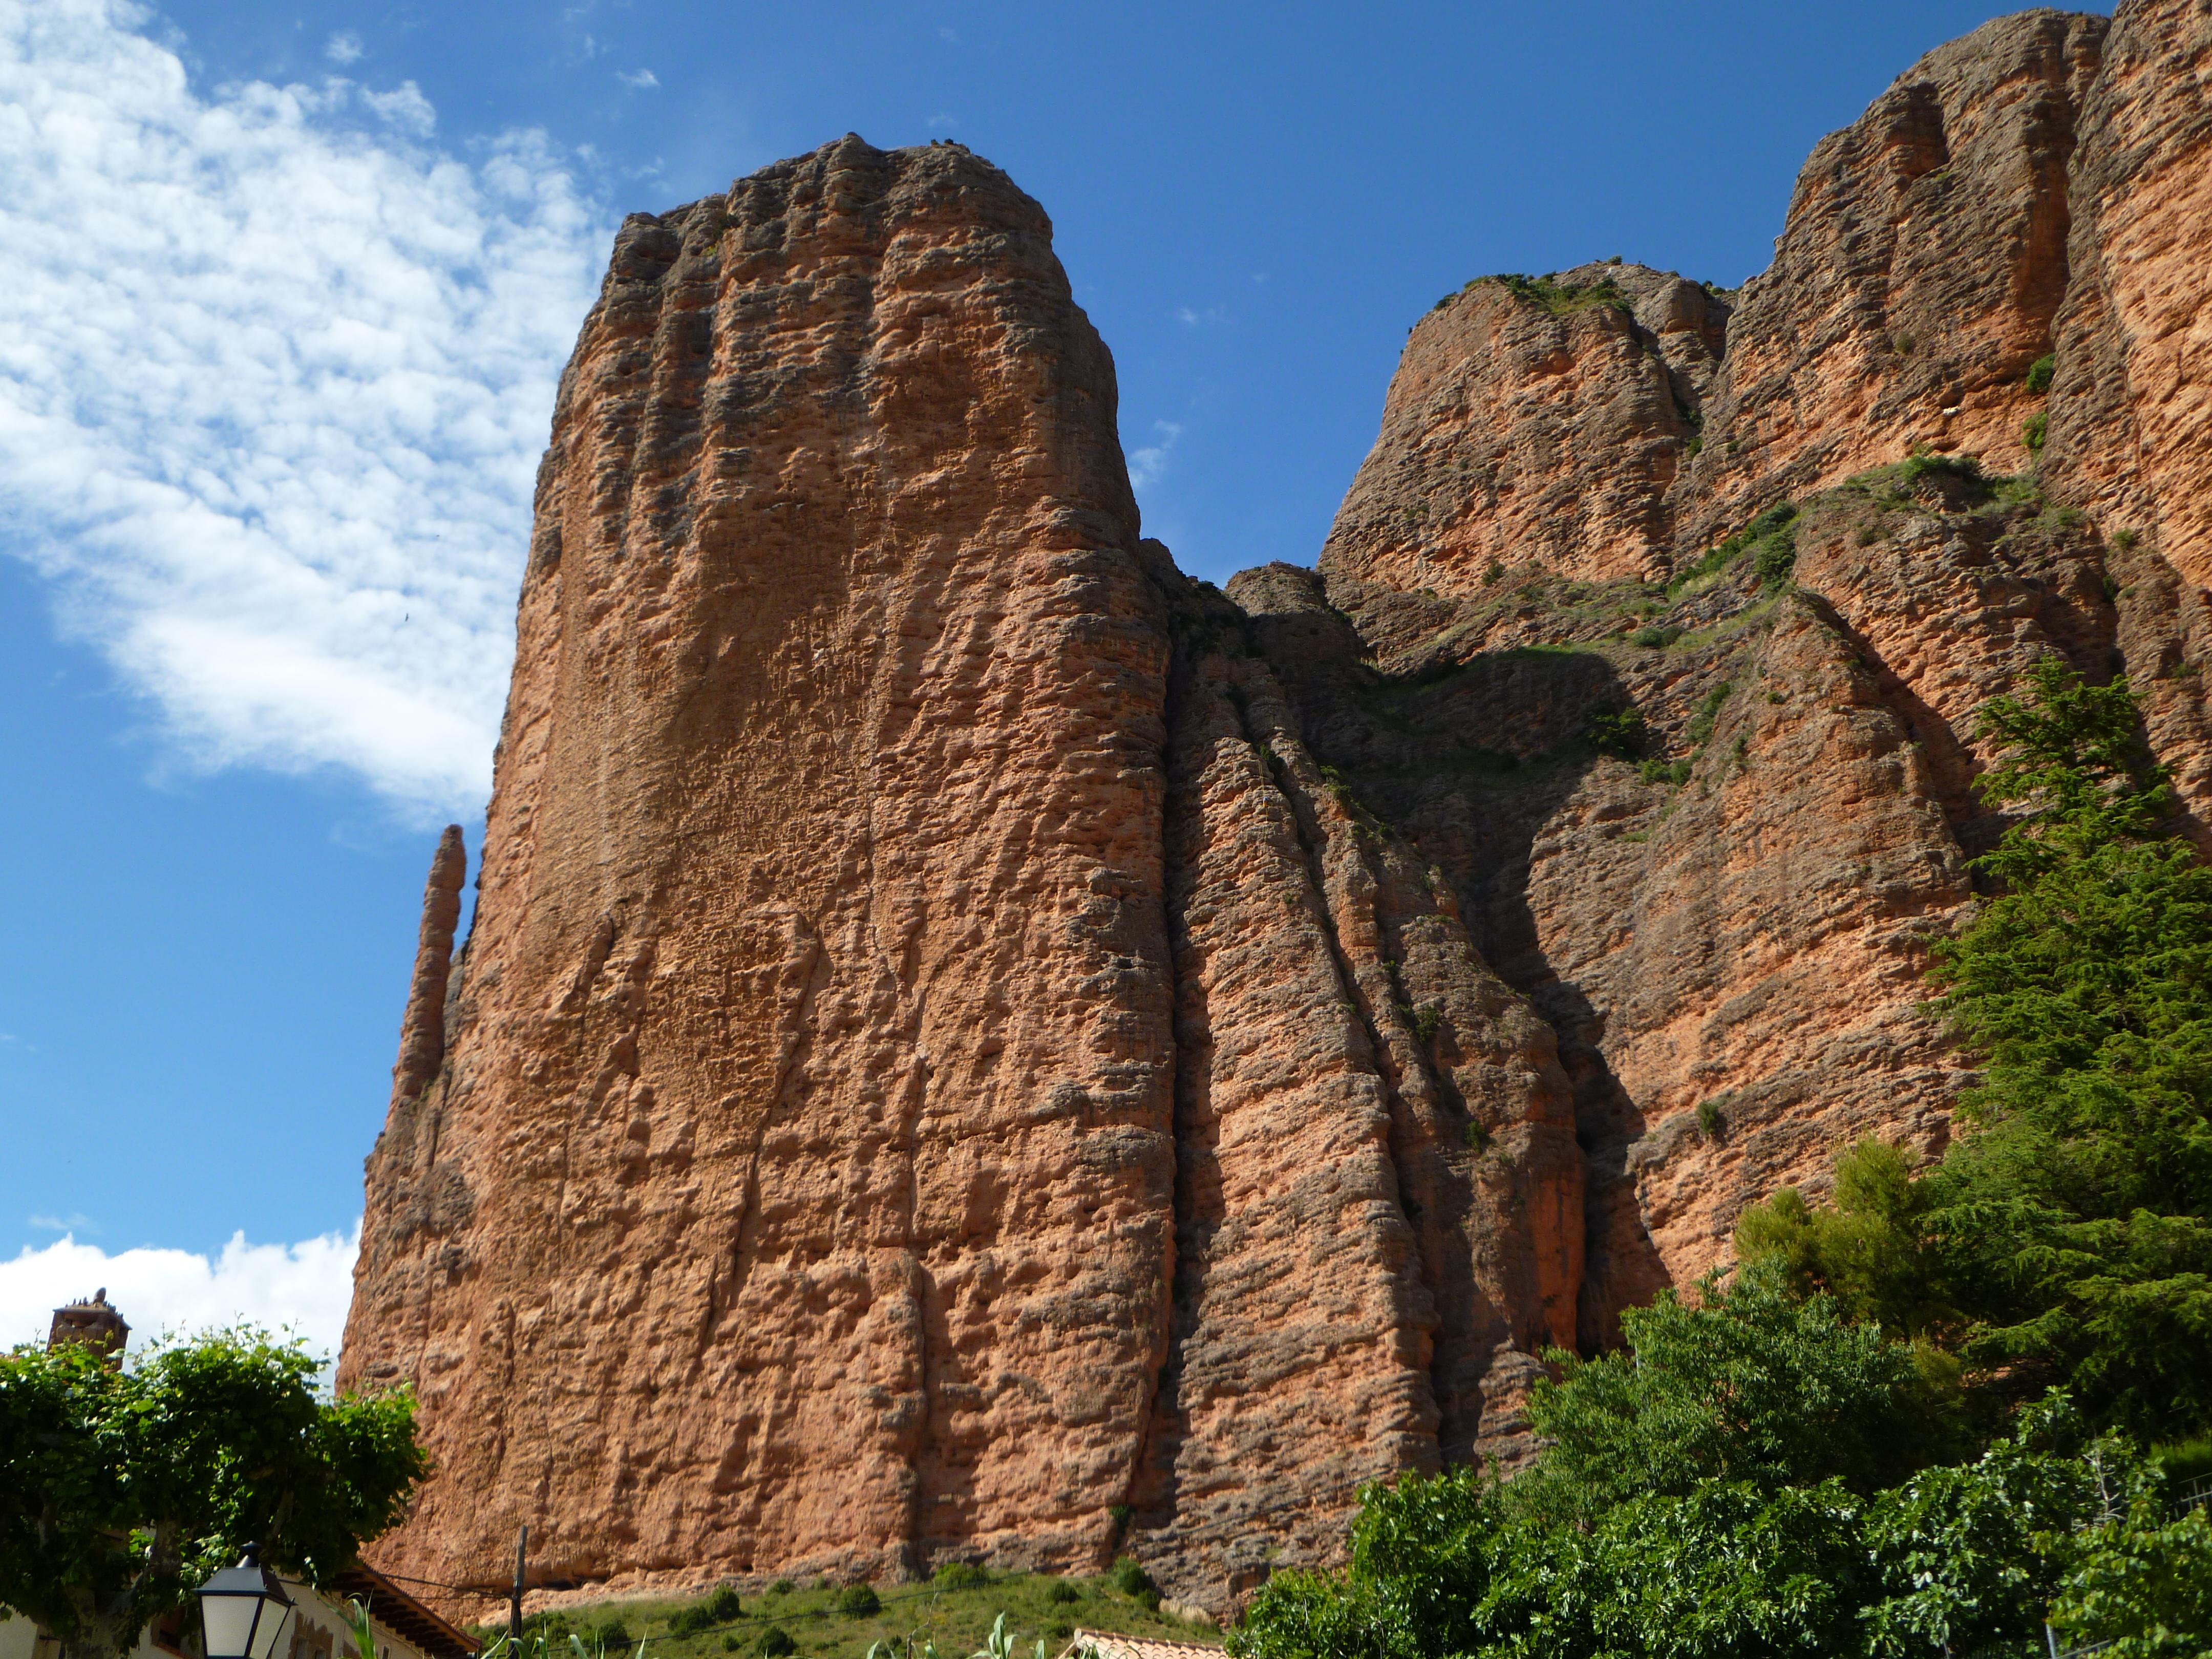 The mighty towers of Mallos de Riglos the authors local crag for five years